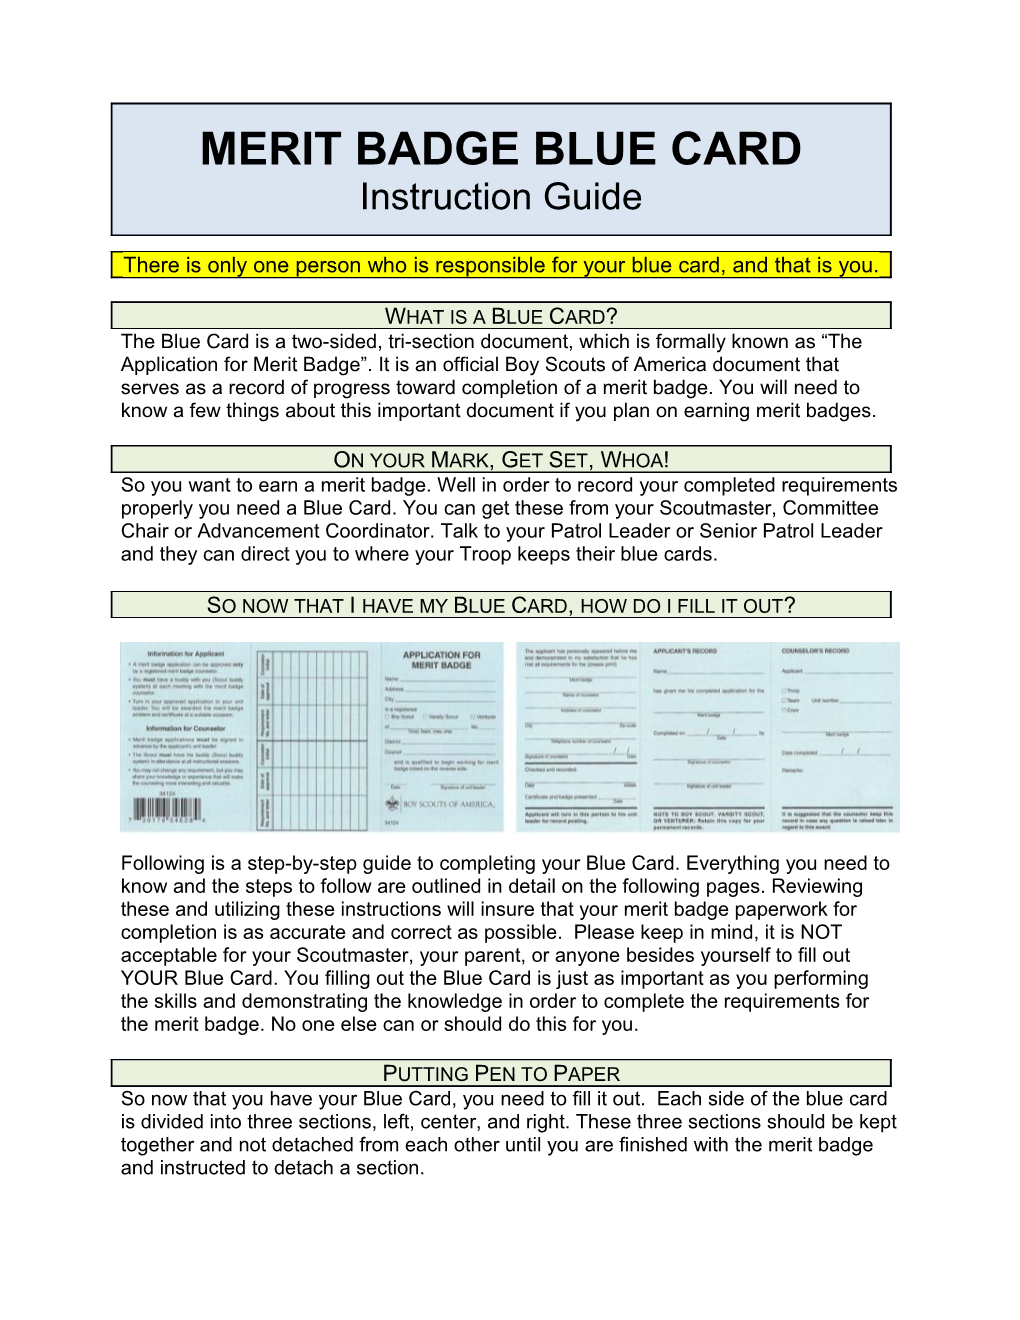 The Blue Card Is a Two-Sided, Tri-Section Document, Which Is Formally Known As the Application